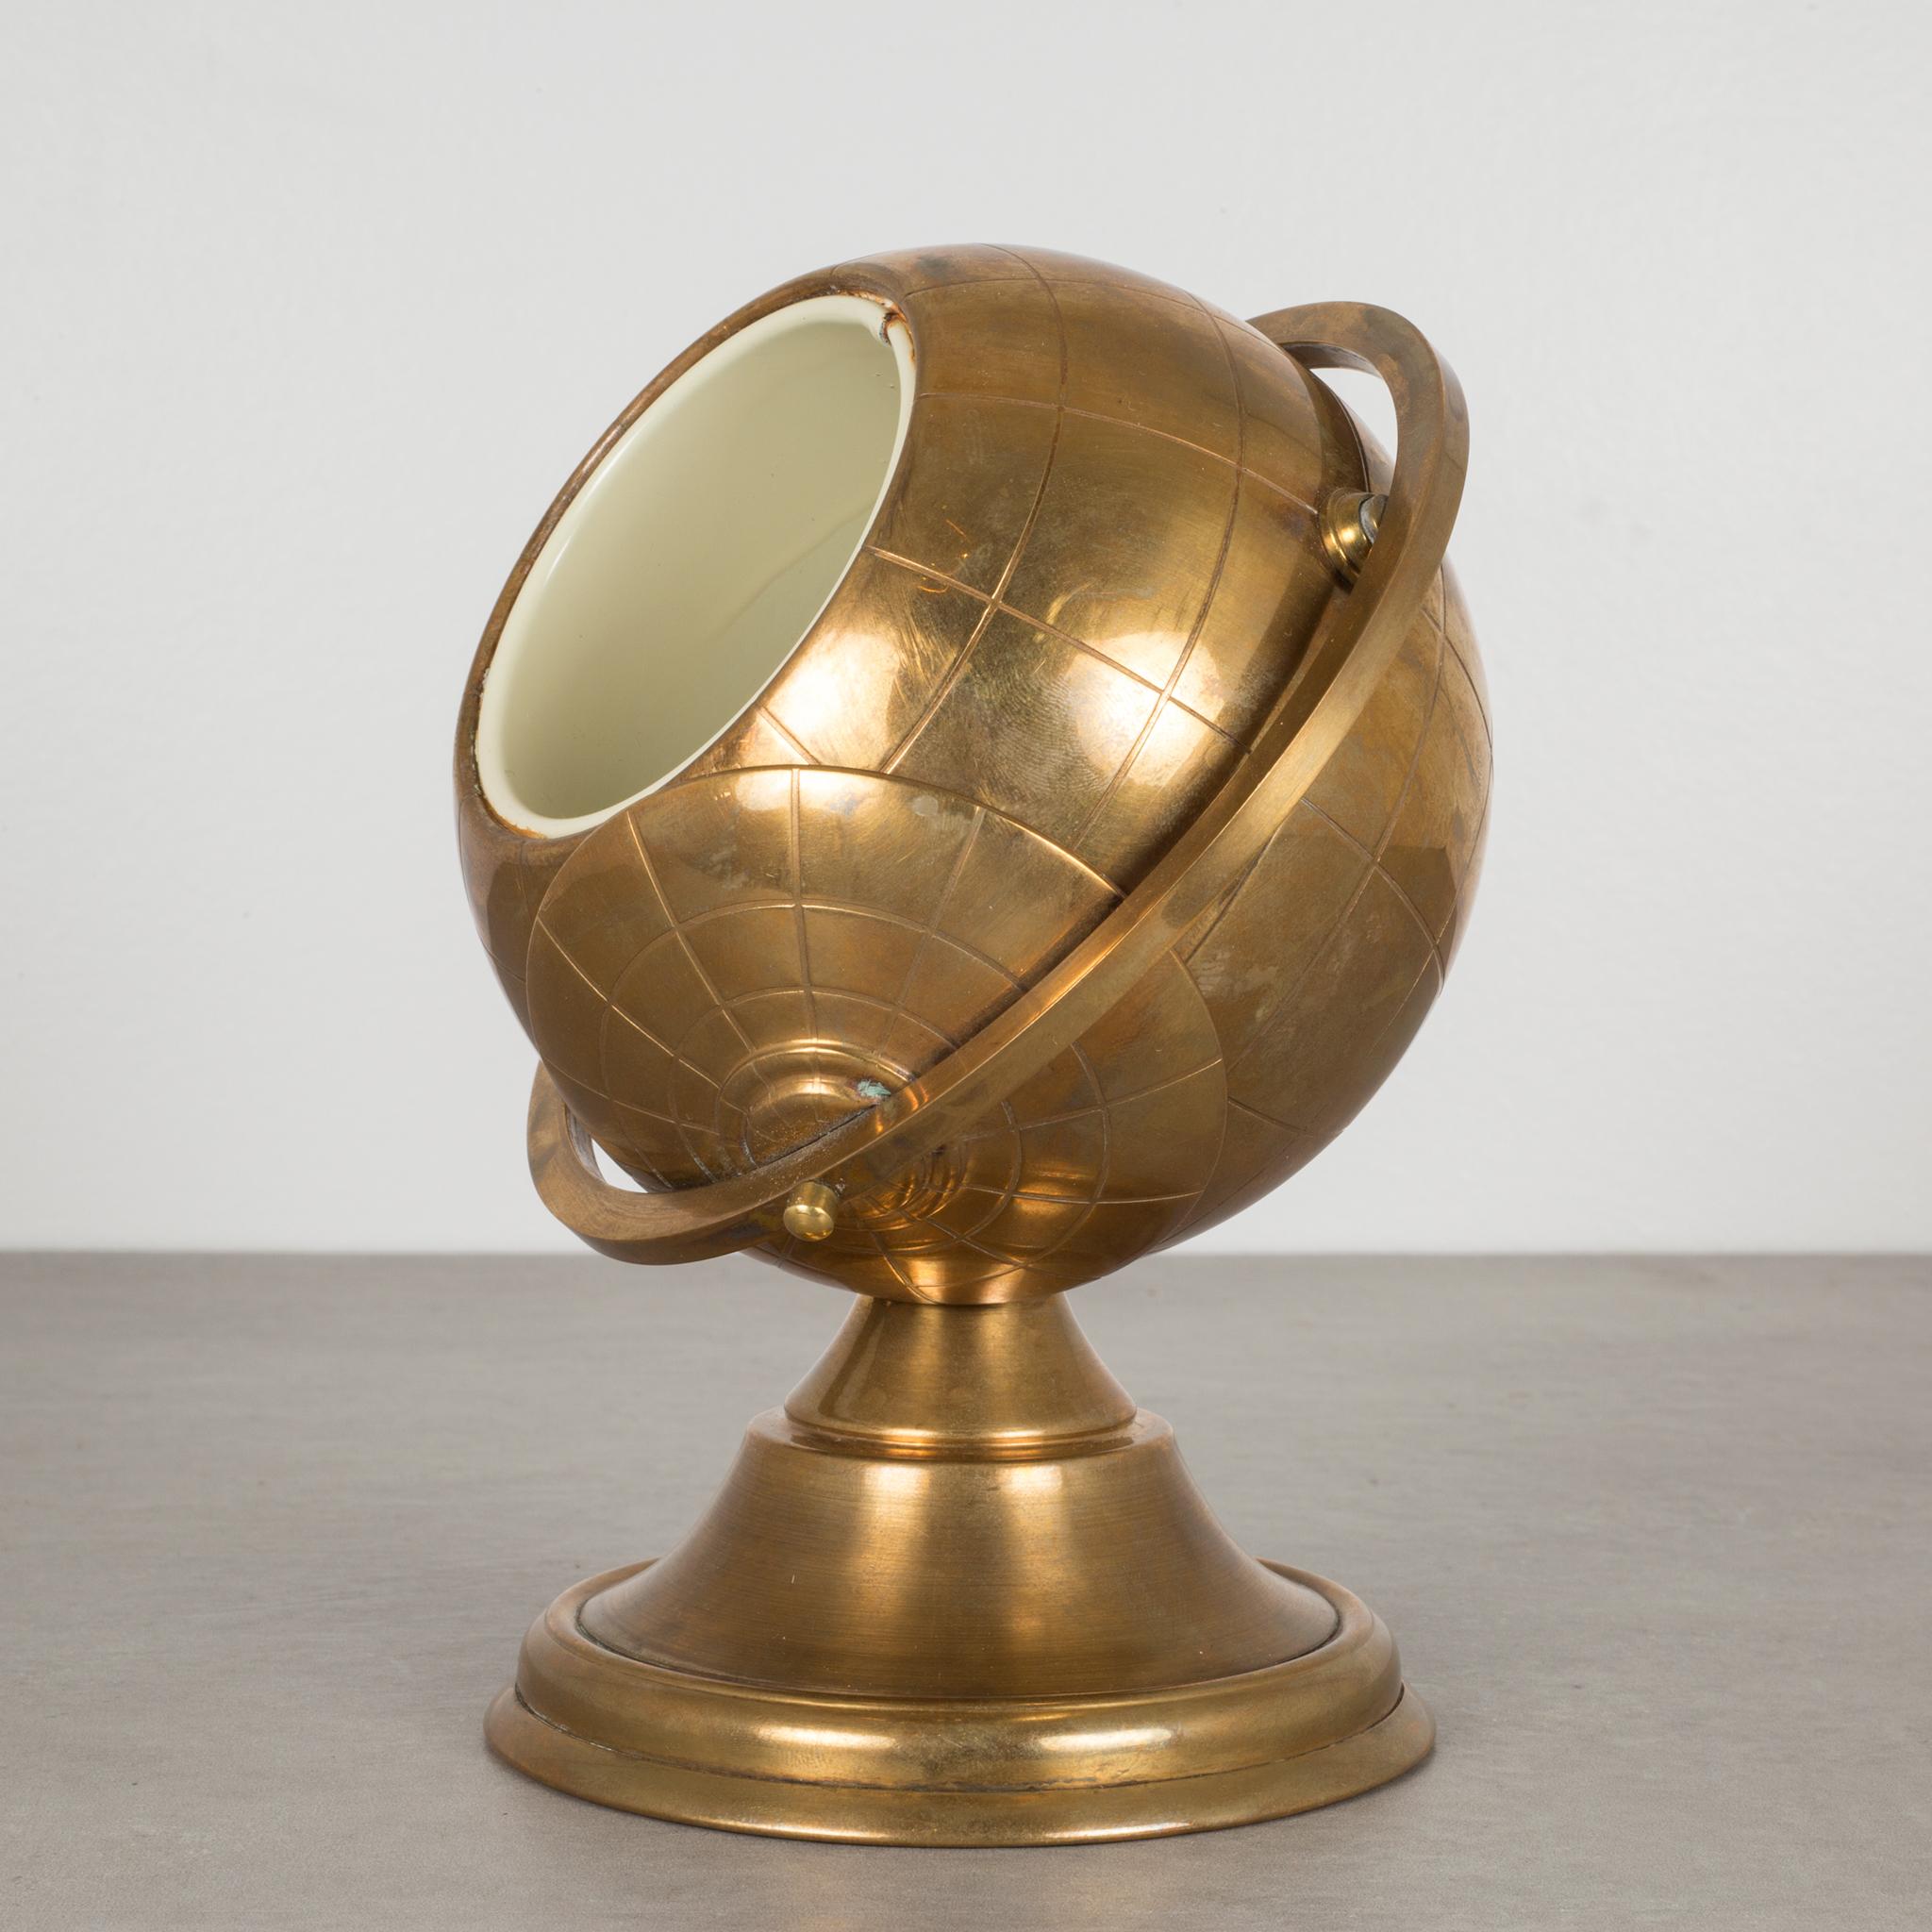 Modernist brass globe cigarette holder with metal interior and swing arm lid.